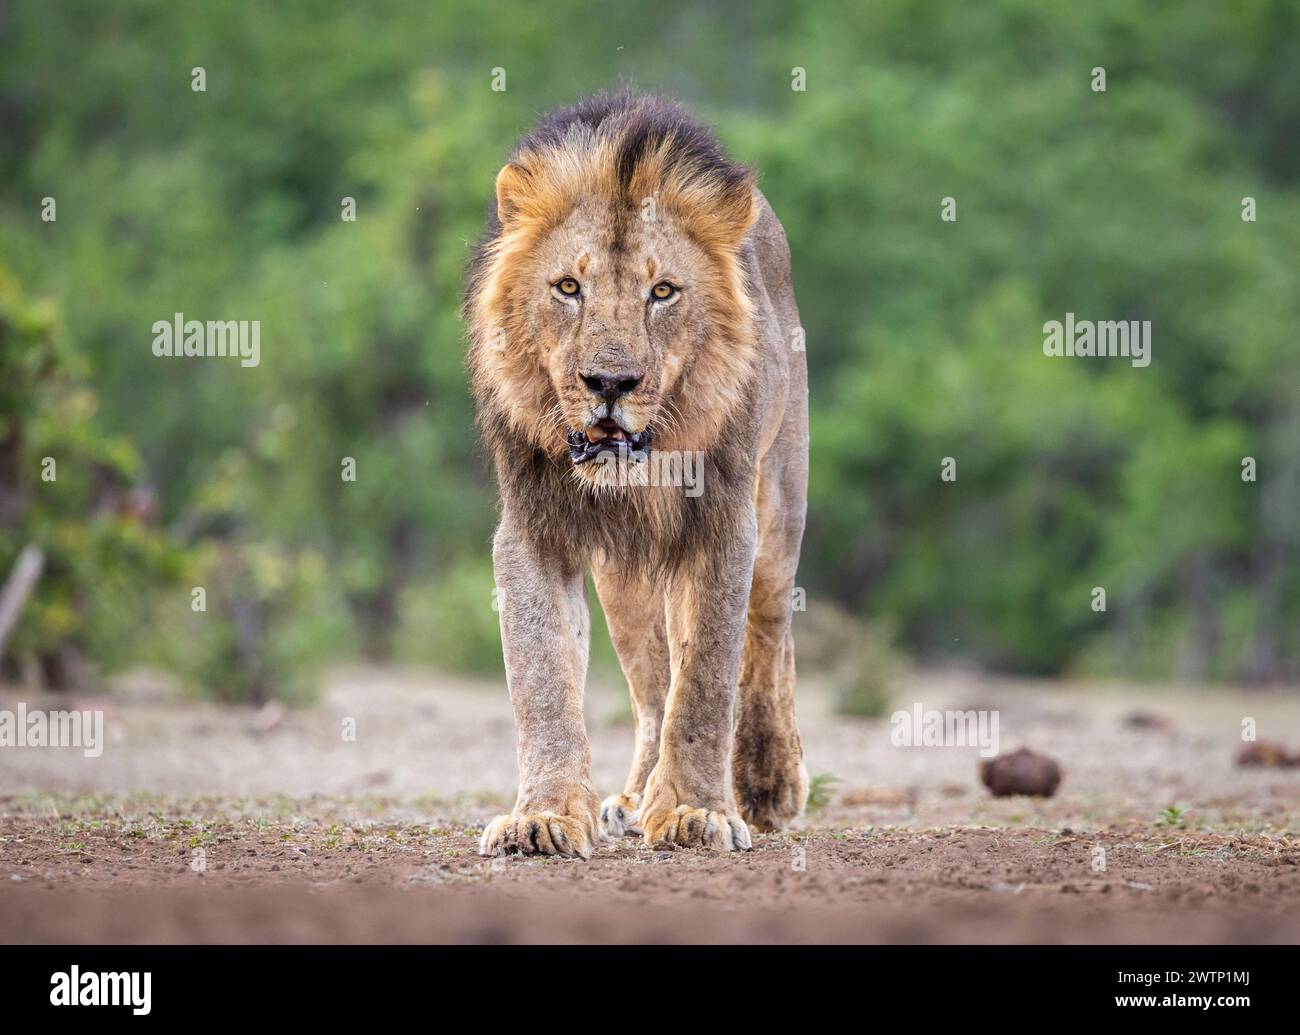 Male lion approaches looking directly at the camera Stock Photo